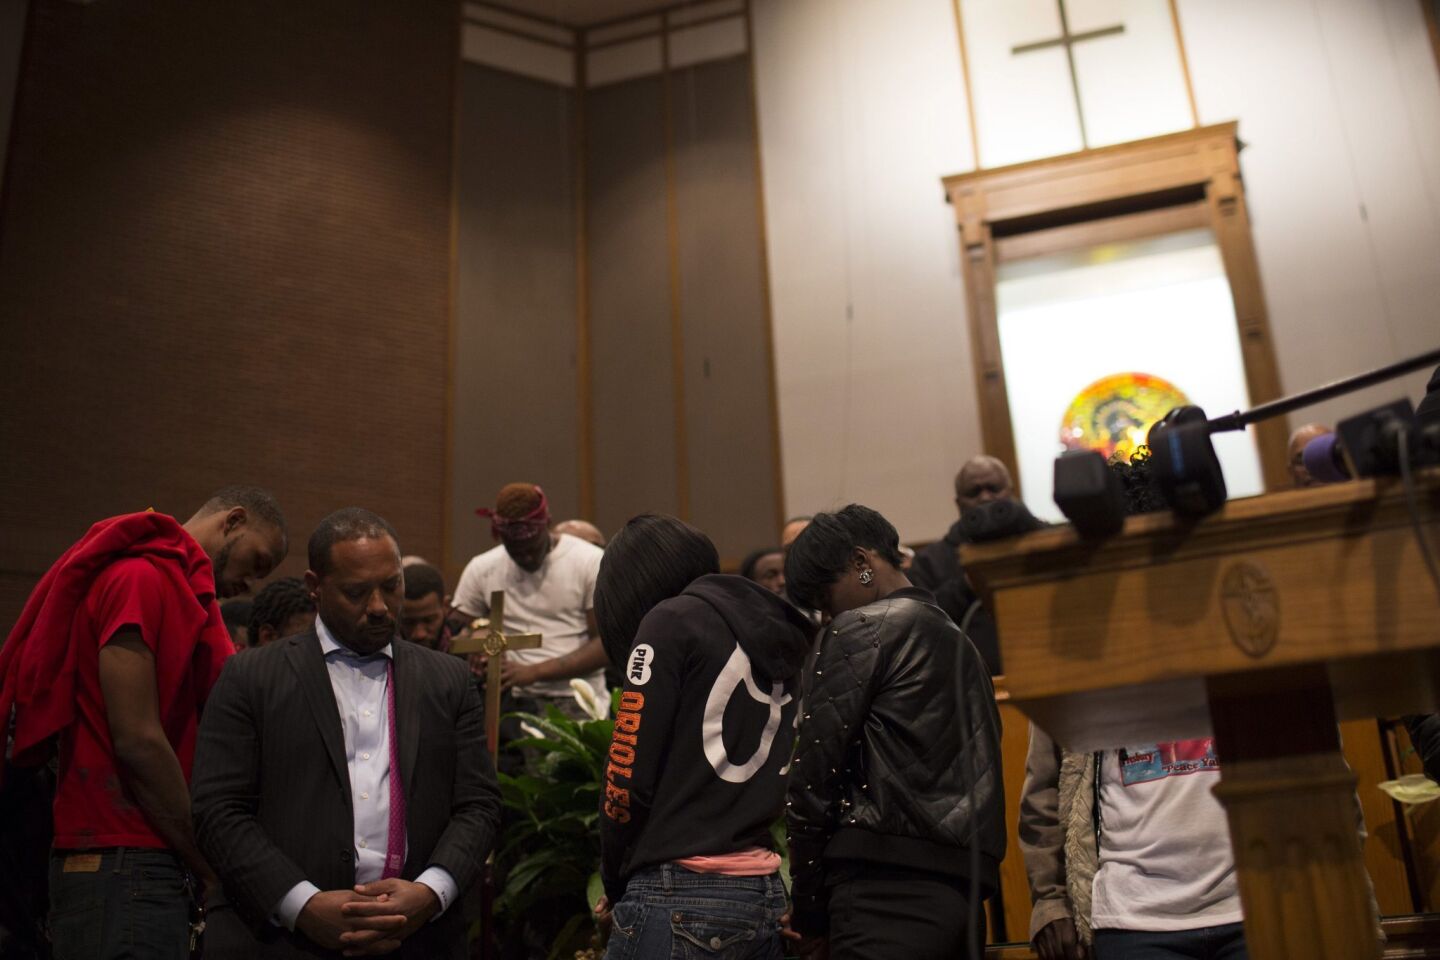 The Family of Freddie Gray, who died after a fatal injury in police custody, pray inside a church after a news conference in Baltimore on Monday.